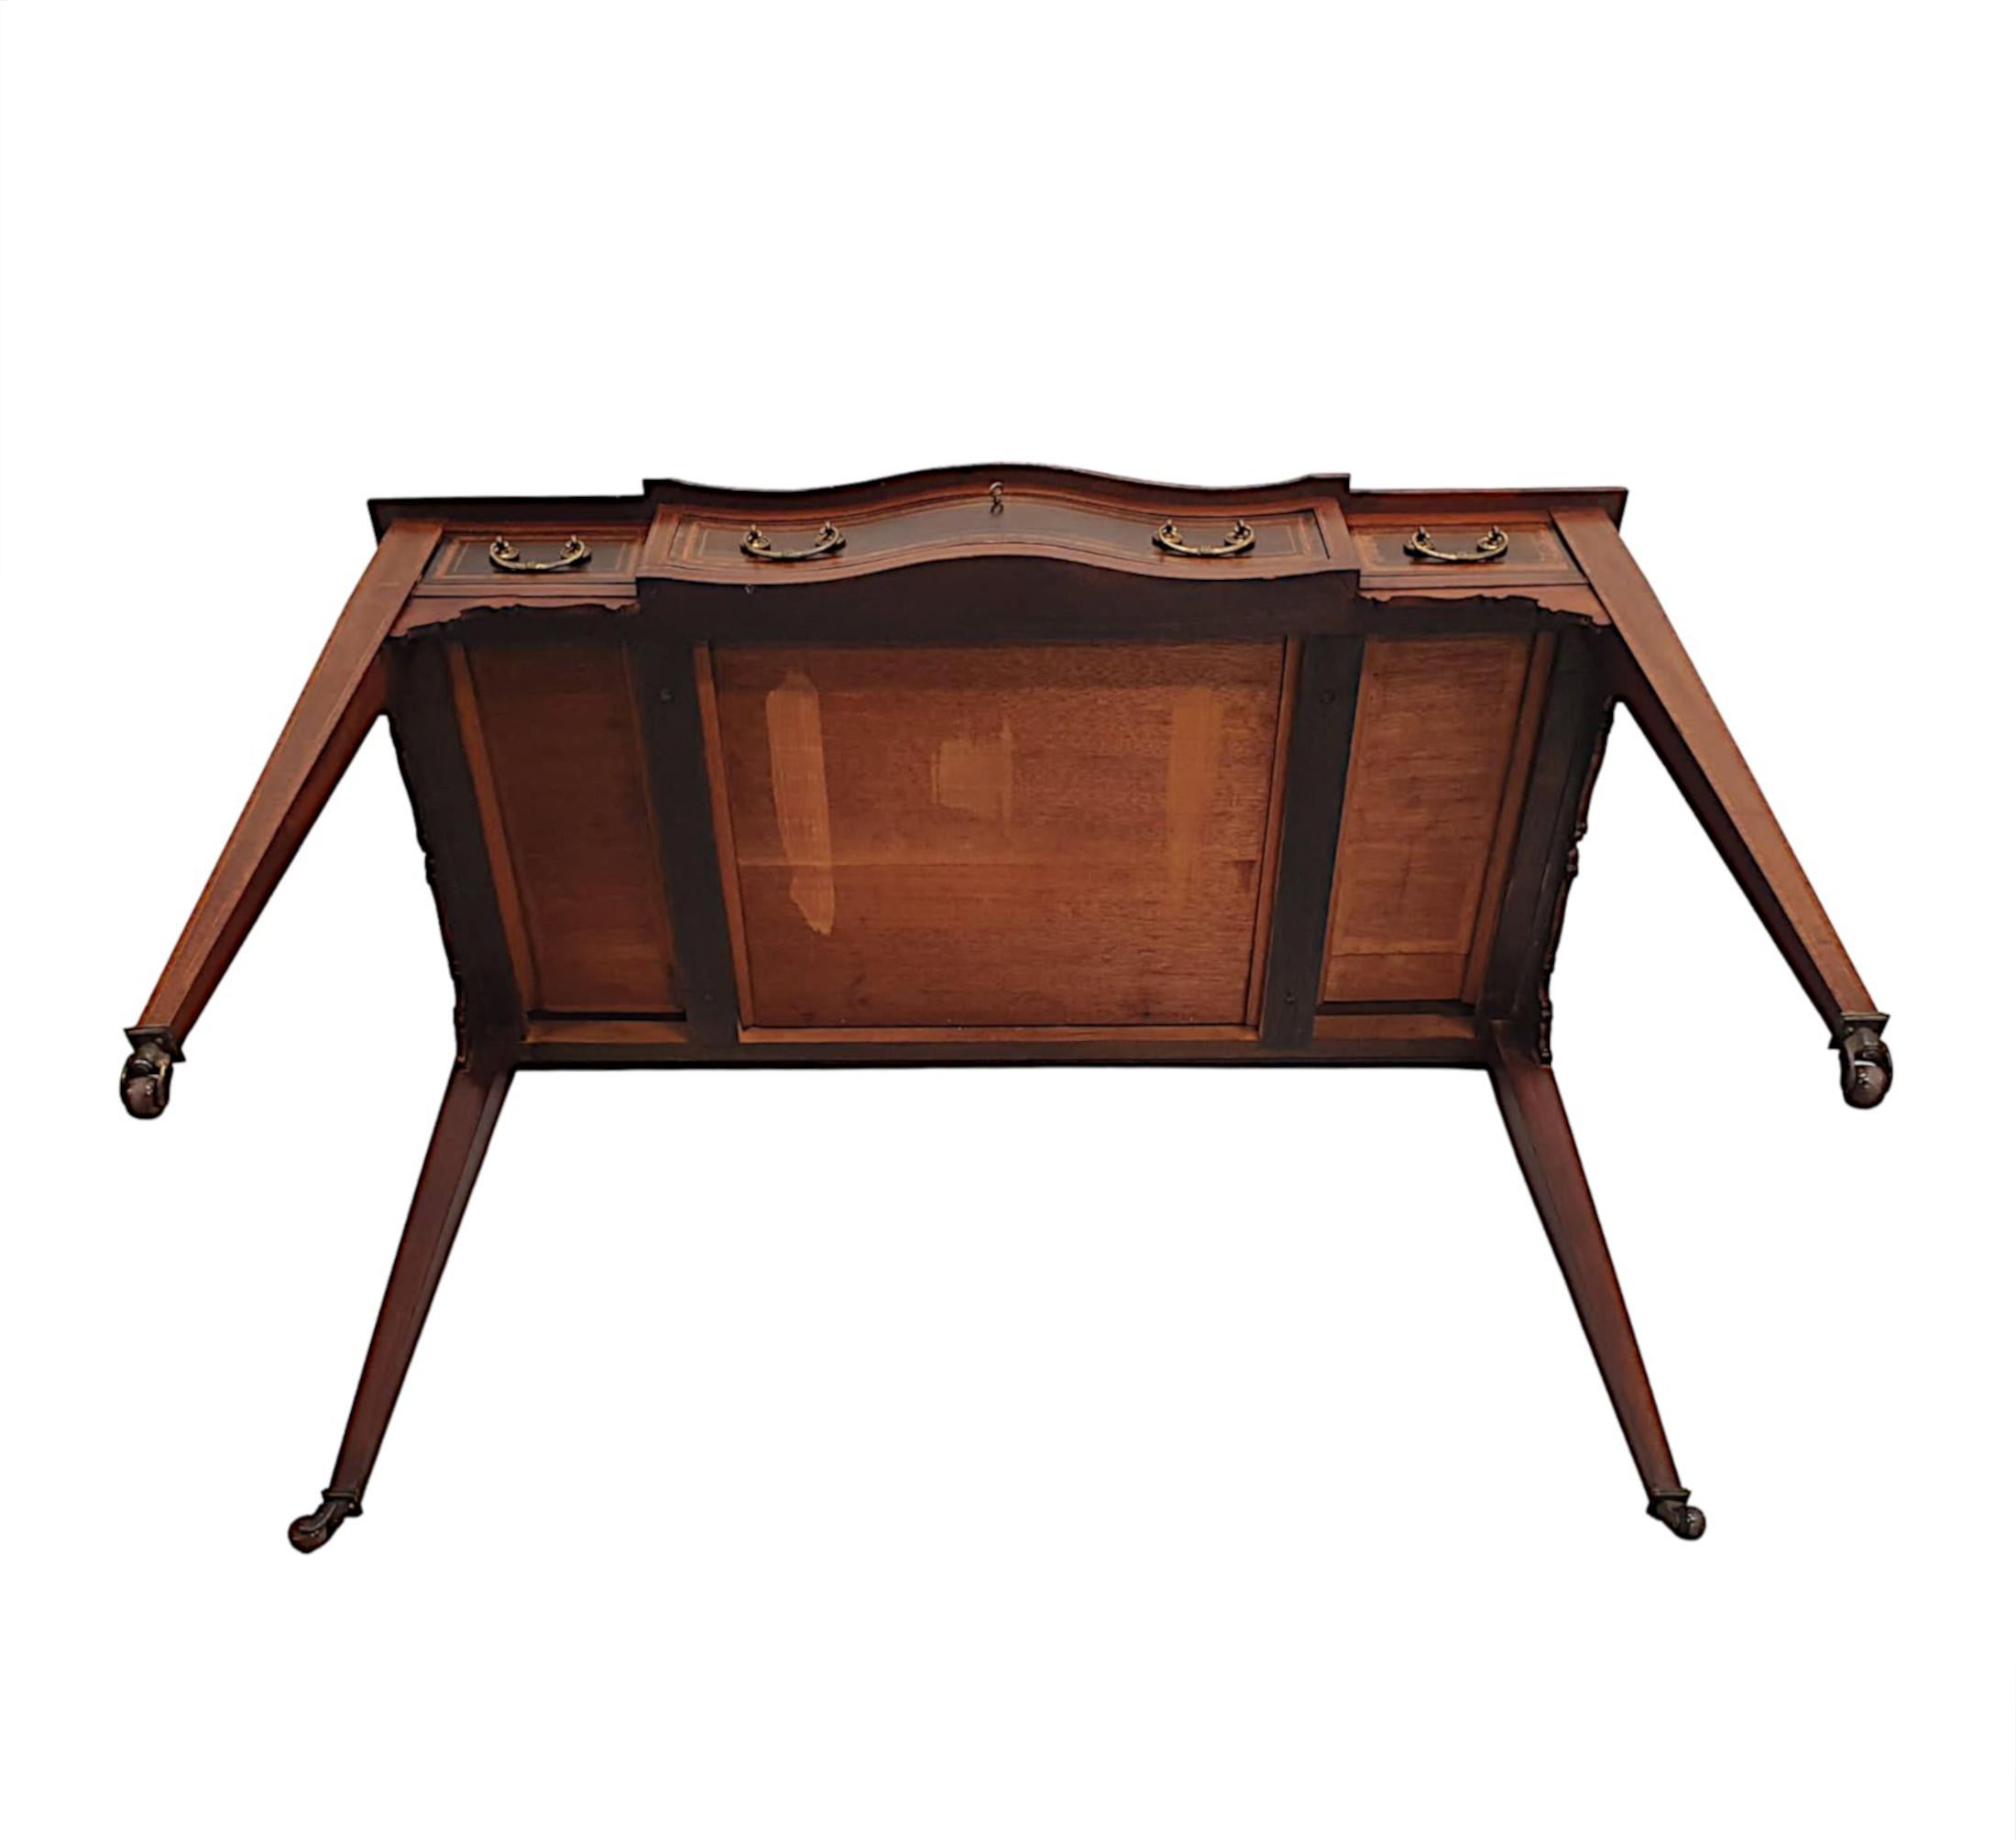 20th Century Fabulous Edwardian Inlaid Desk in the Carlton House Style For Sale